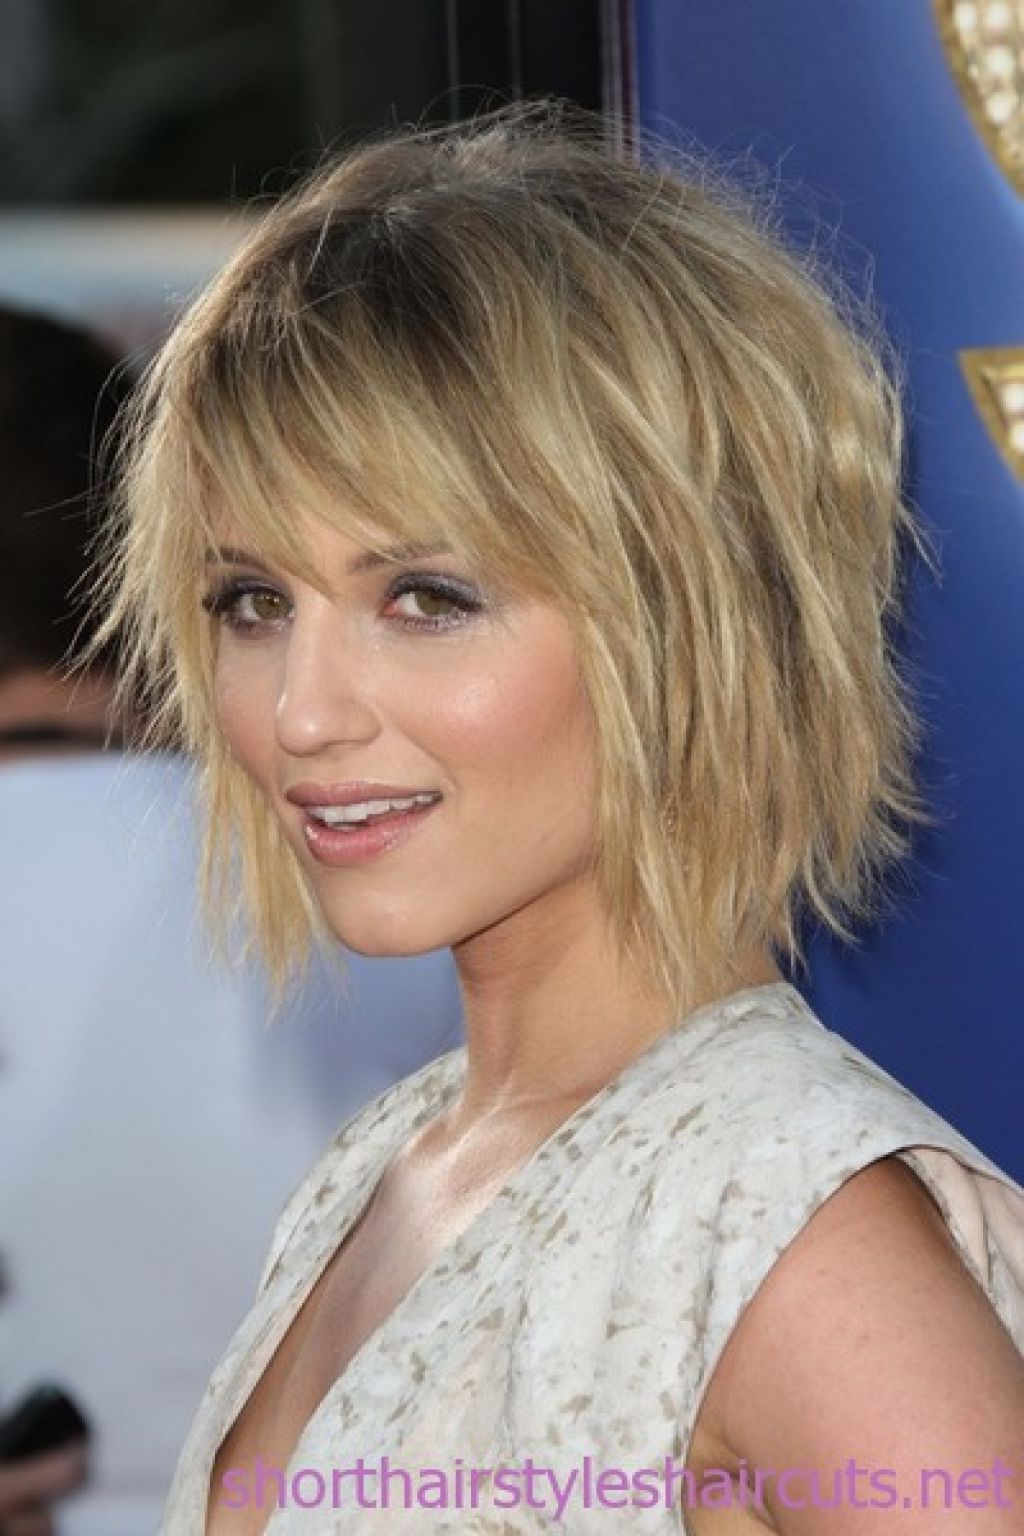 Chin Length Hairstyles Regarding Haircuts With Choppy Bangs With Short Chopped Haircuts With Bangs (View 19 of 20)